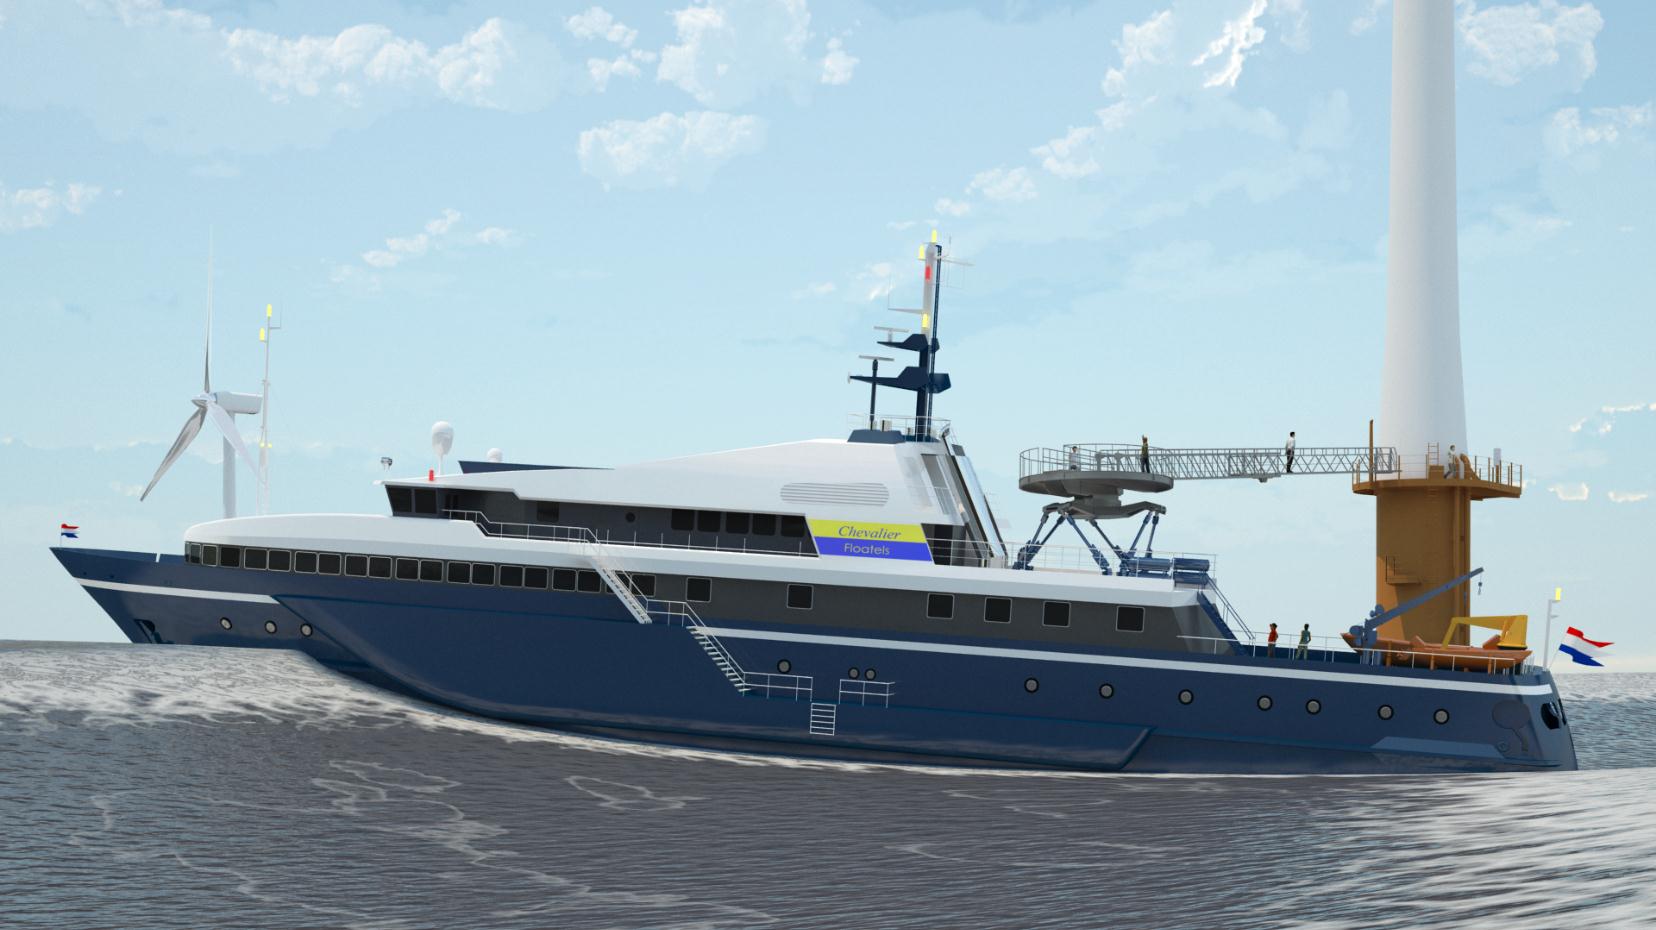 Holland Shipyards Commences Conversion of Two Ships into Offshore Wind Farm Vessels